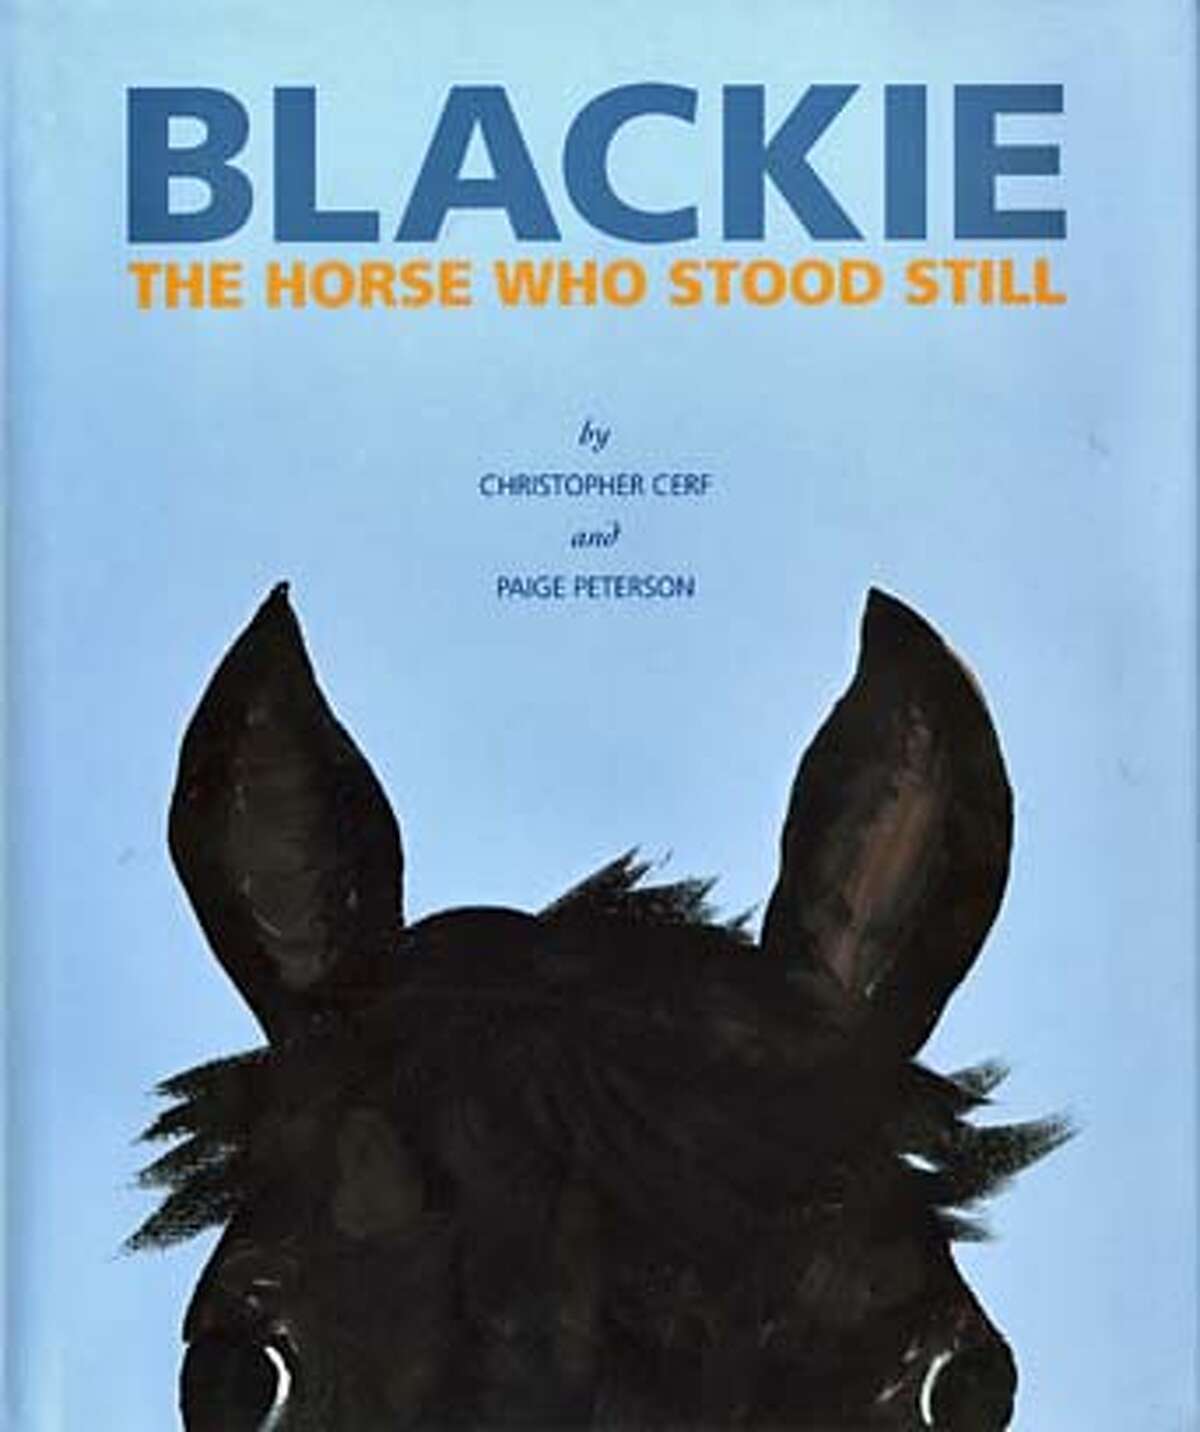 Cover of "Blackie: The Horse Who Stood Still" by Christopher Cerf and Paige Peterson